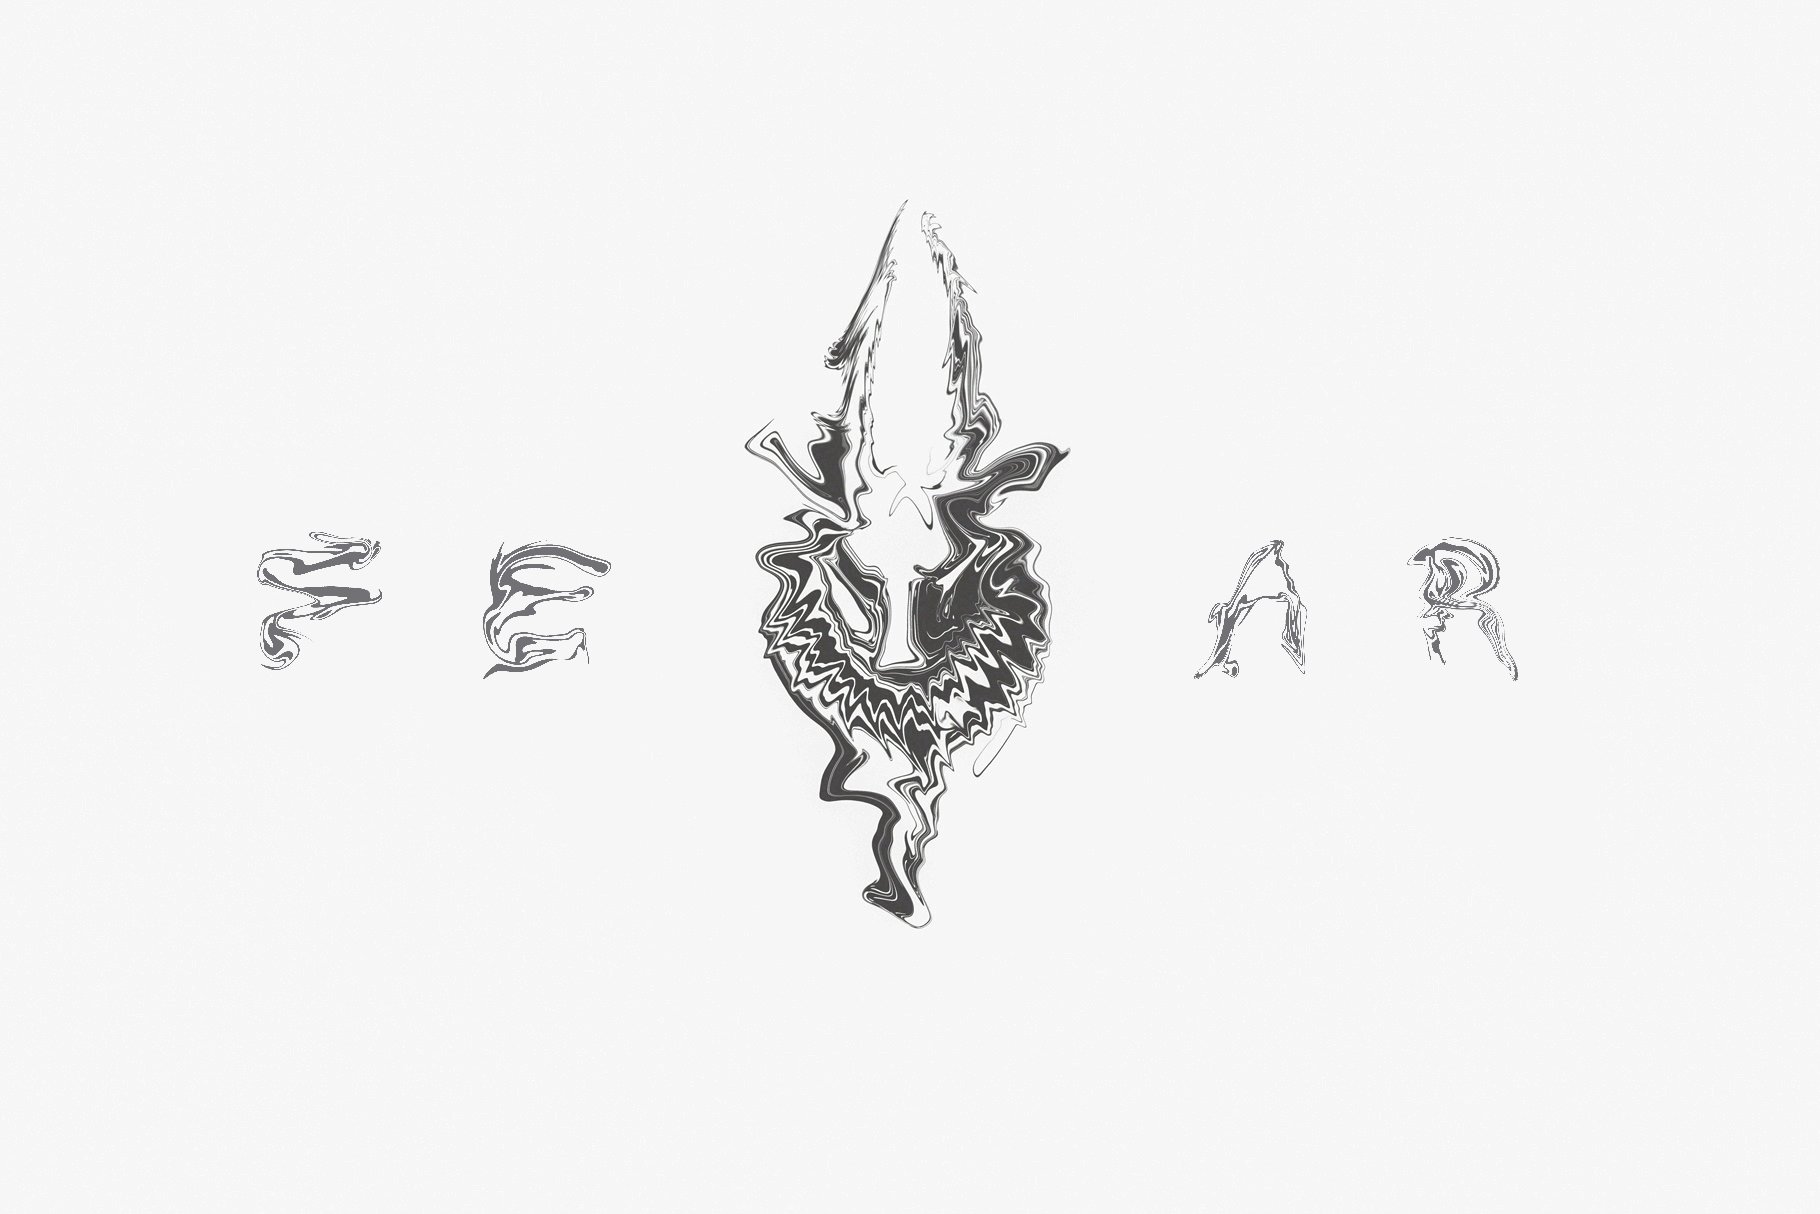 FEAR Font cover image.